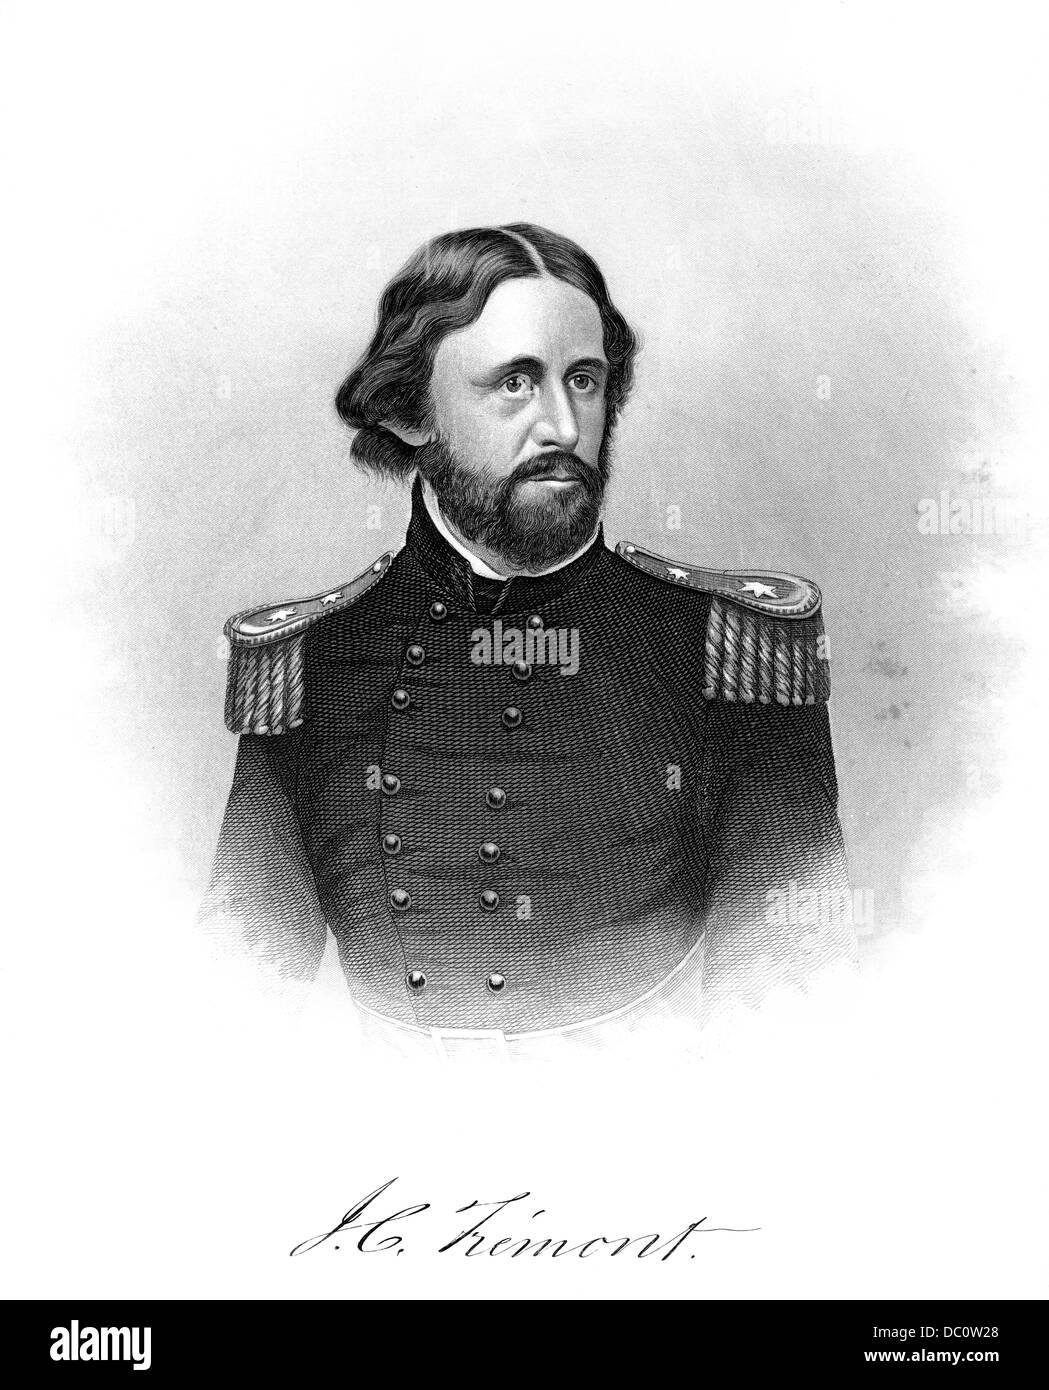 1860s MAJOR GENERAL JOHN C FREMONT AMERICAN SOLDIER EXPLORER POLITICIAN SERVED IN MEXICAN AMERICAN WAR AND AMERICAN CIVIL WAR Stock Photo